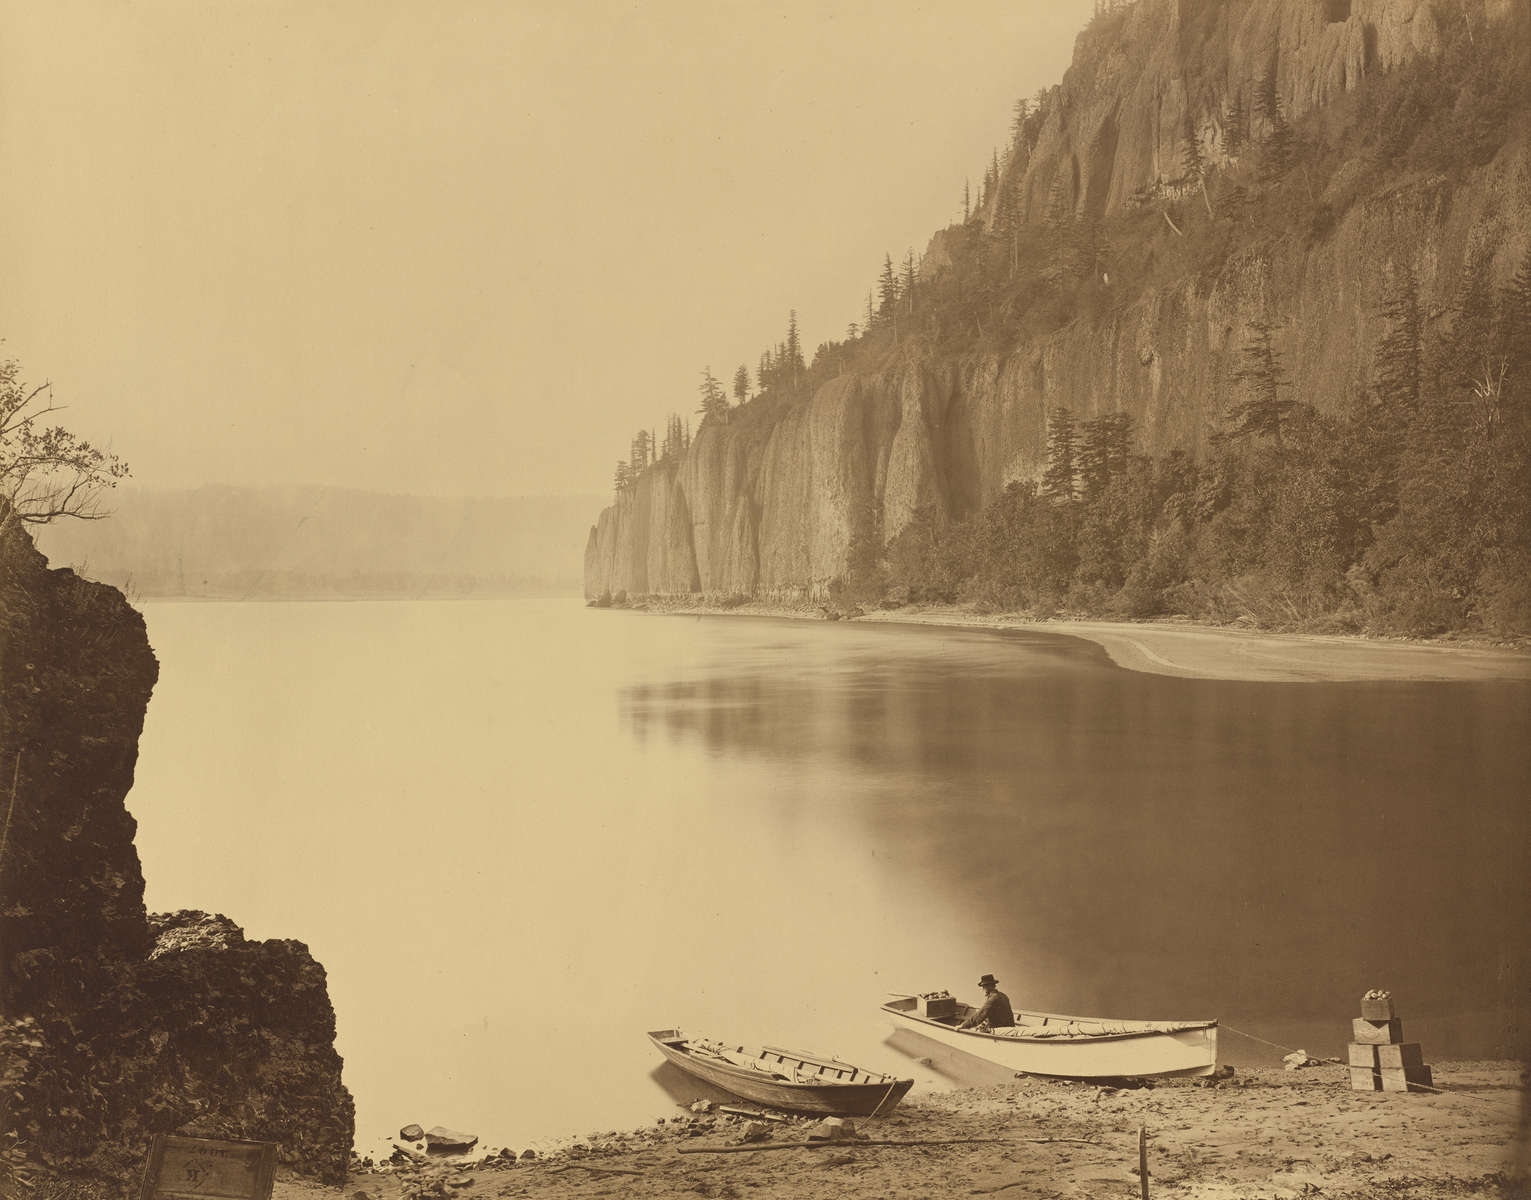 Carleton E. Watkins, Cape Horn, Columbia River, American, 1829 - 1916, 1867, albumen print from collodion negative mounted on paperboard, Gift of Mary and David Robinson